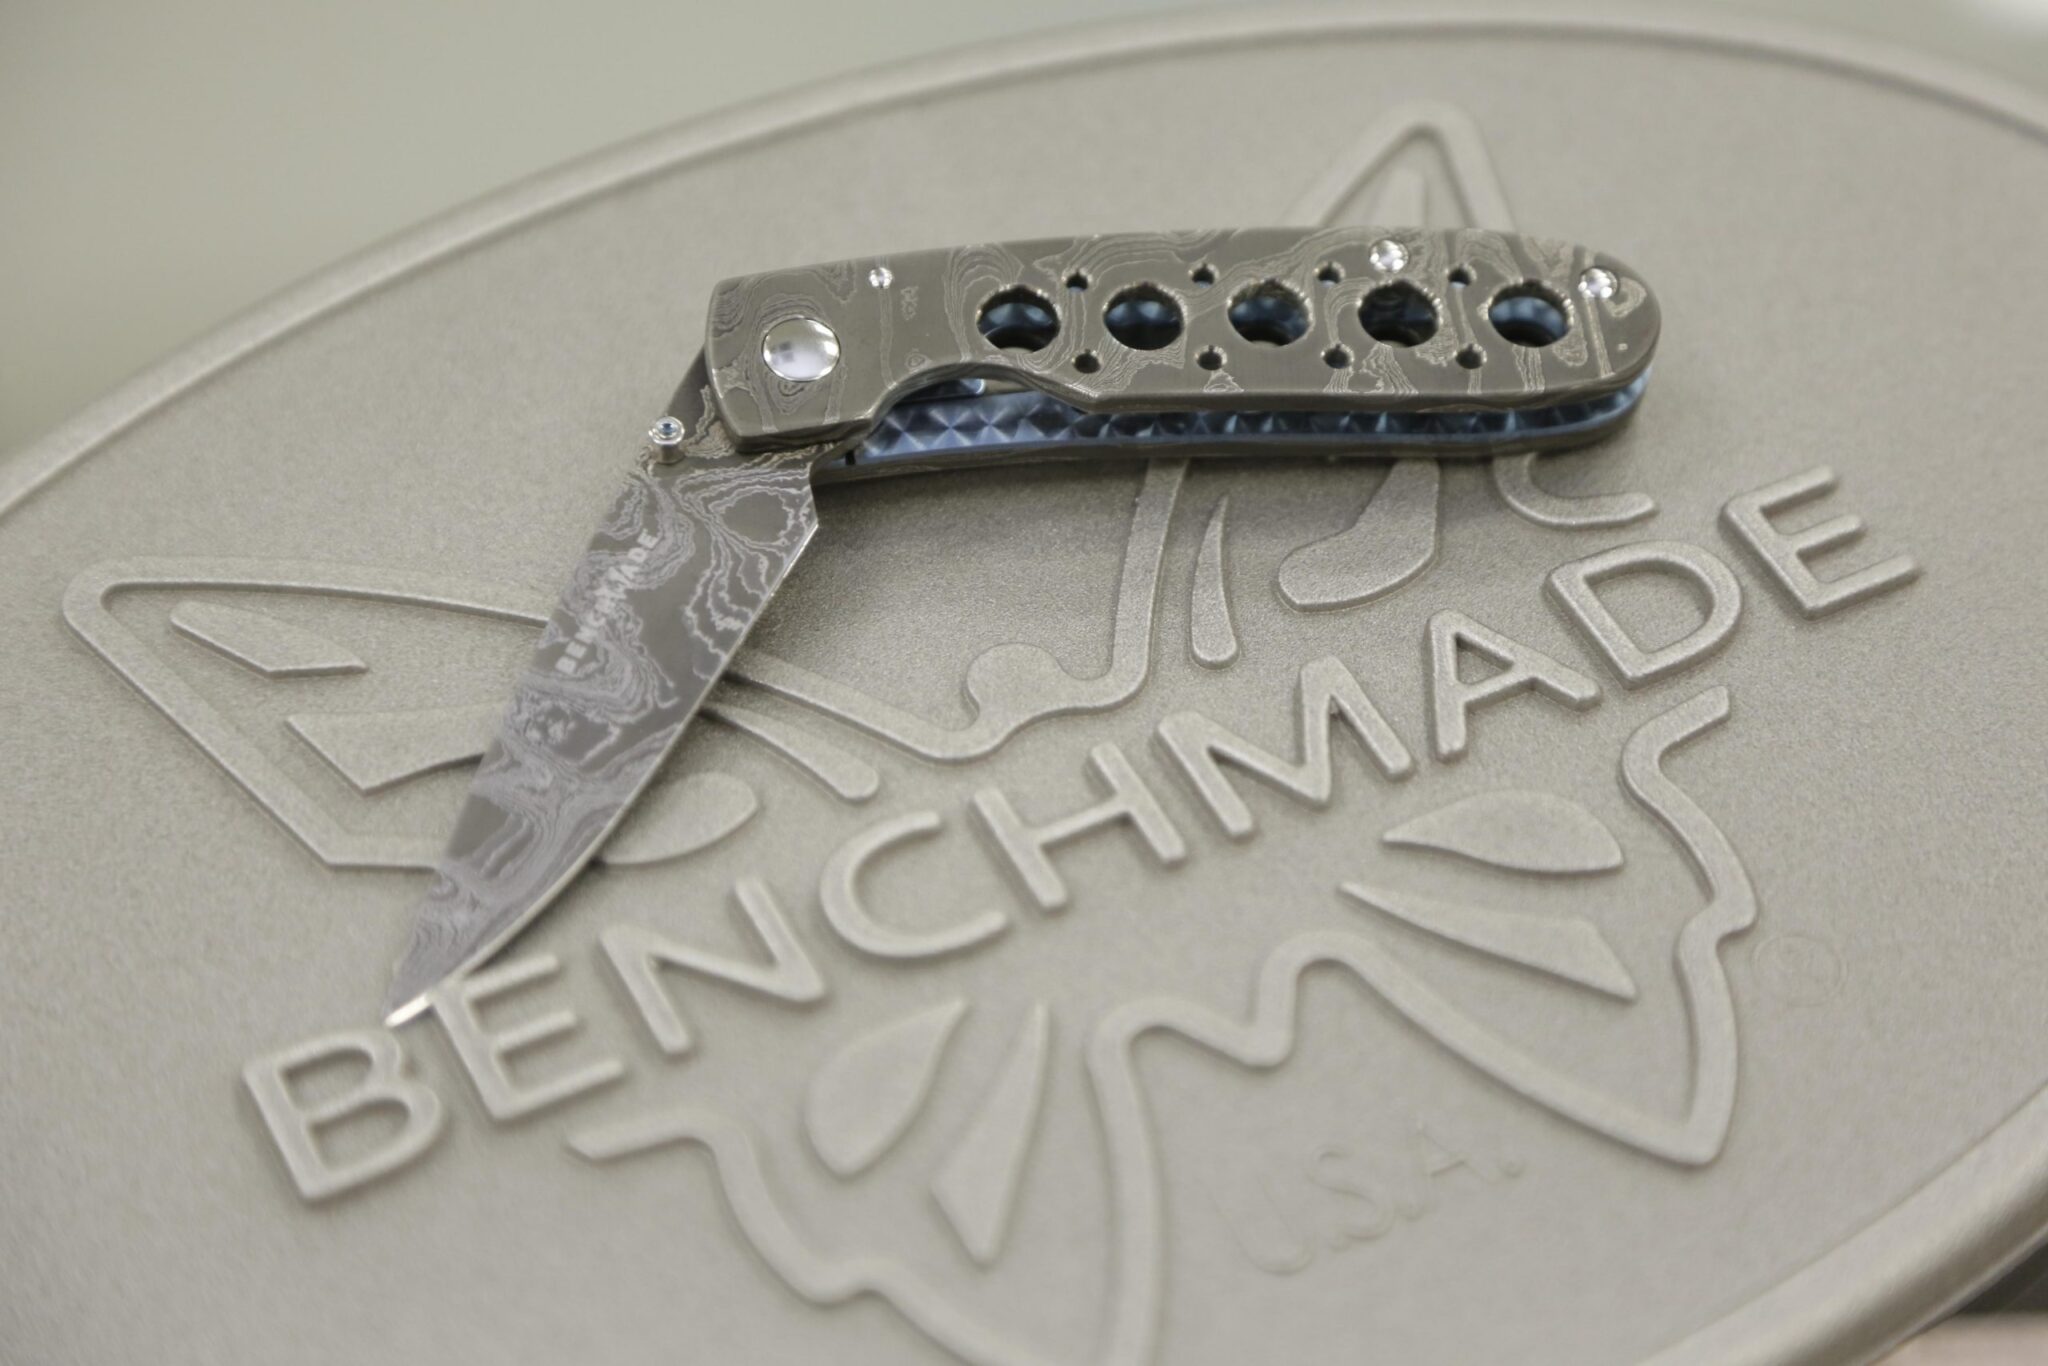 The gray color Benchmade knife